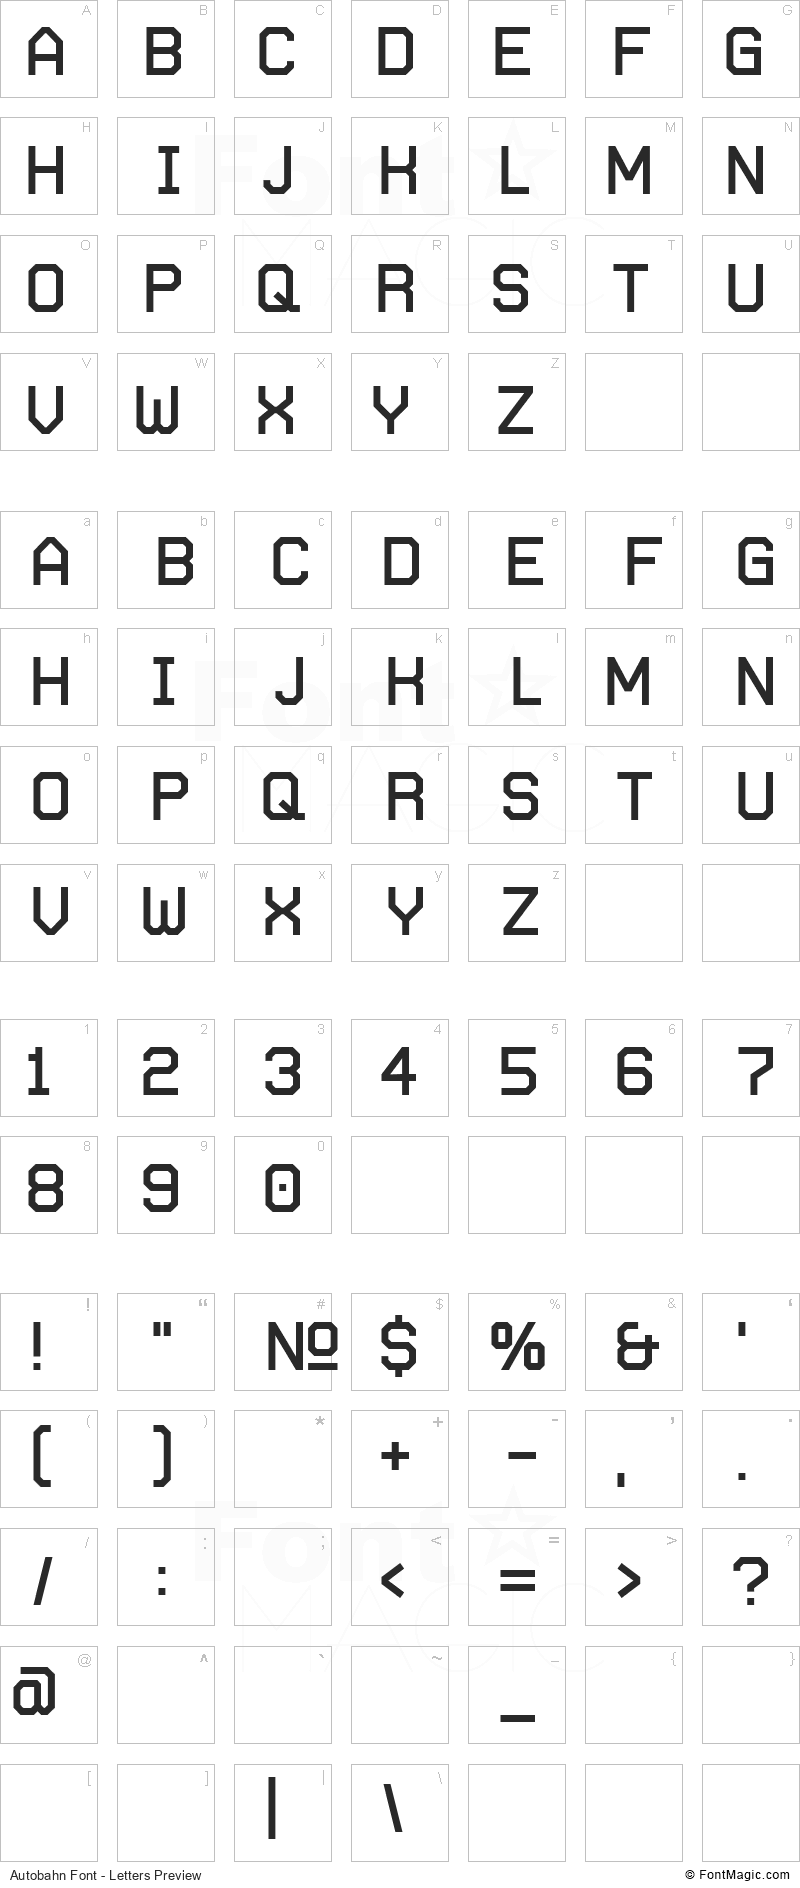 Autobahn Font - All Latters Preview Chart